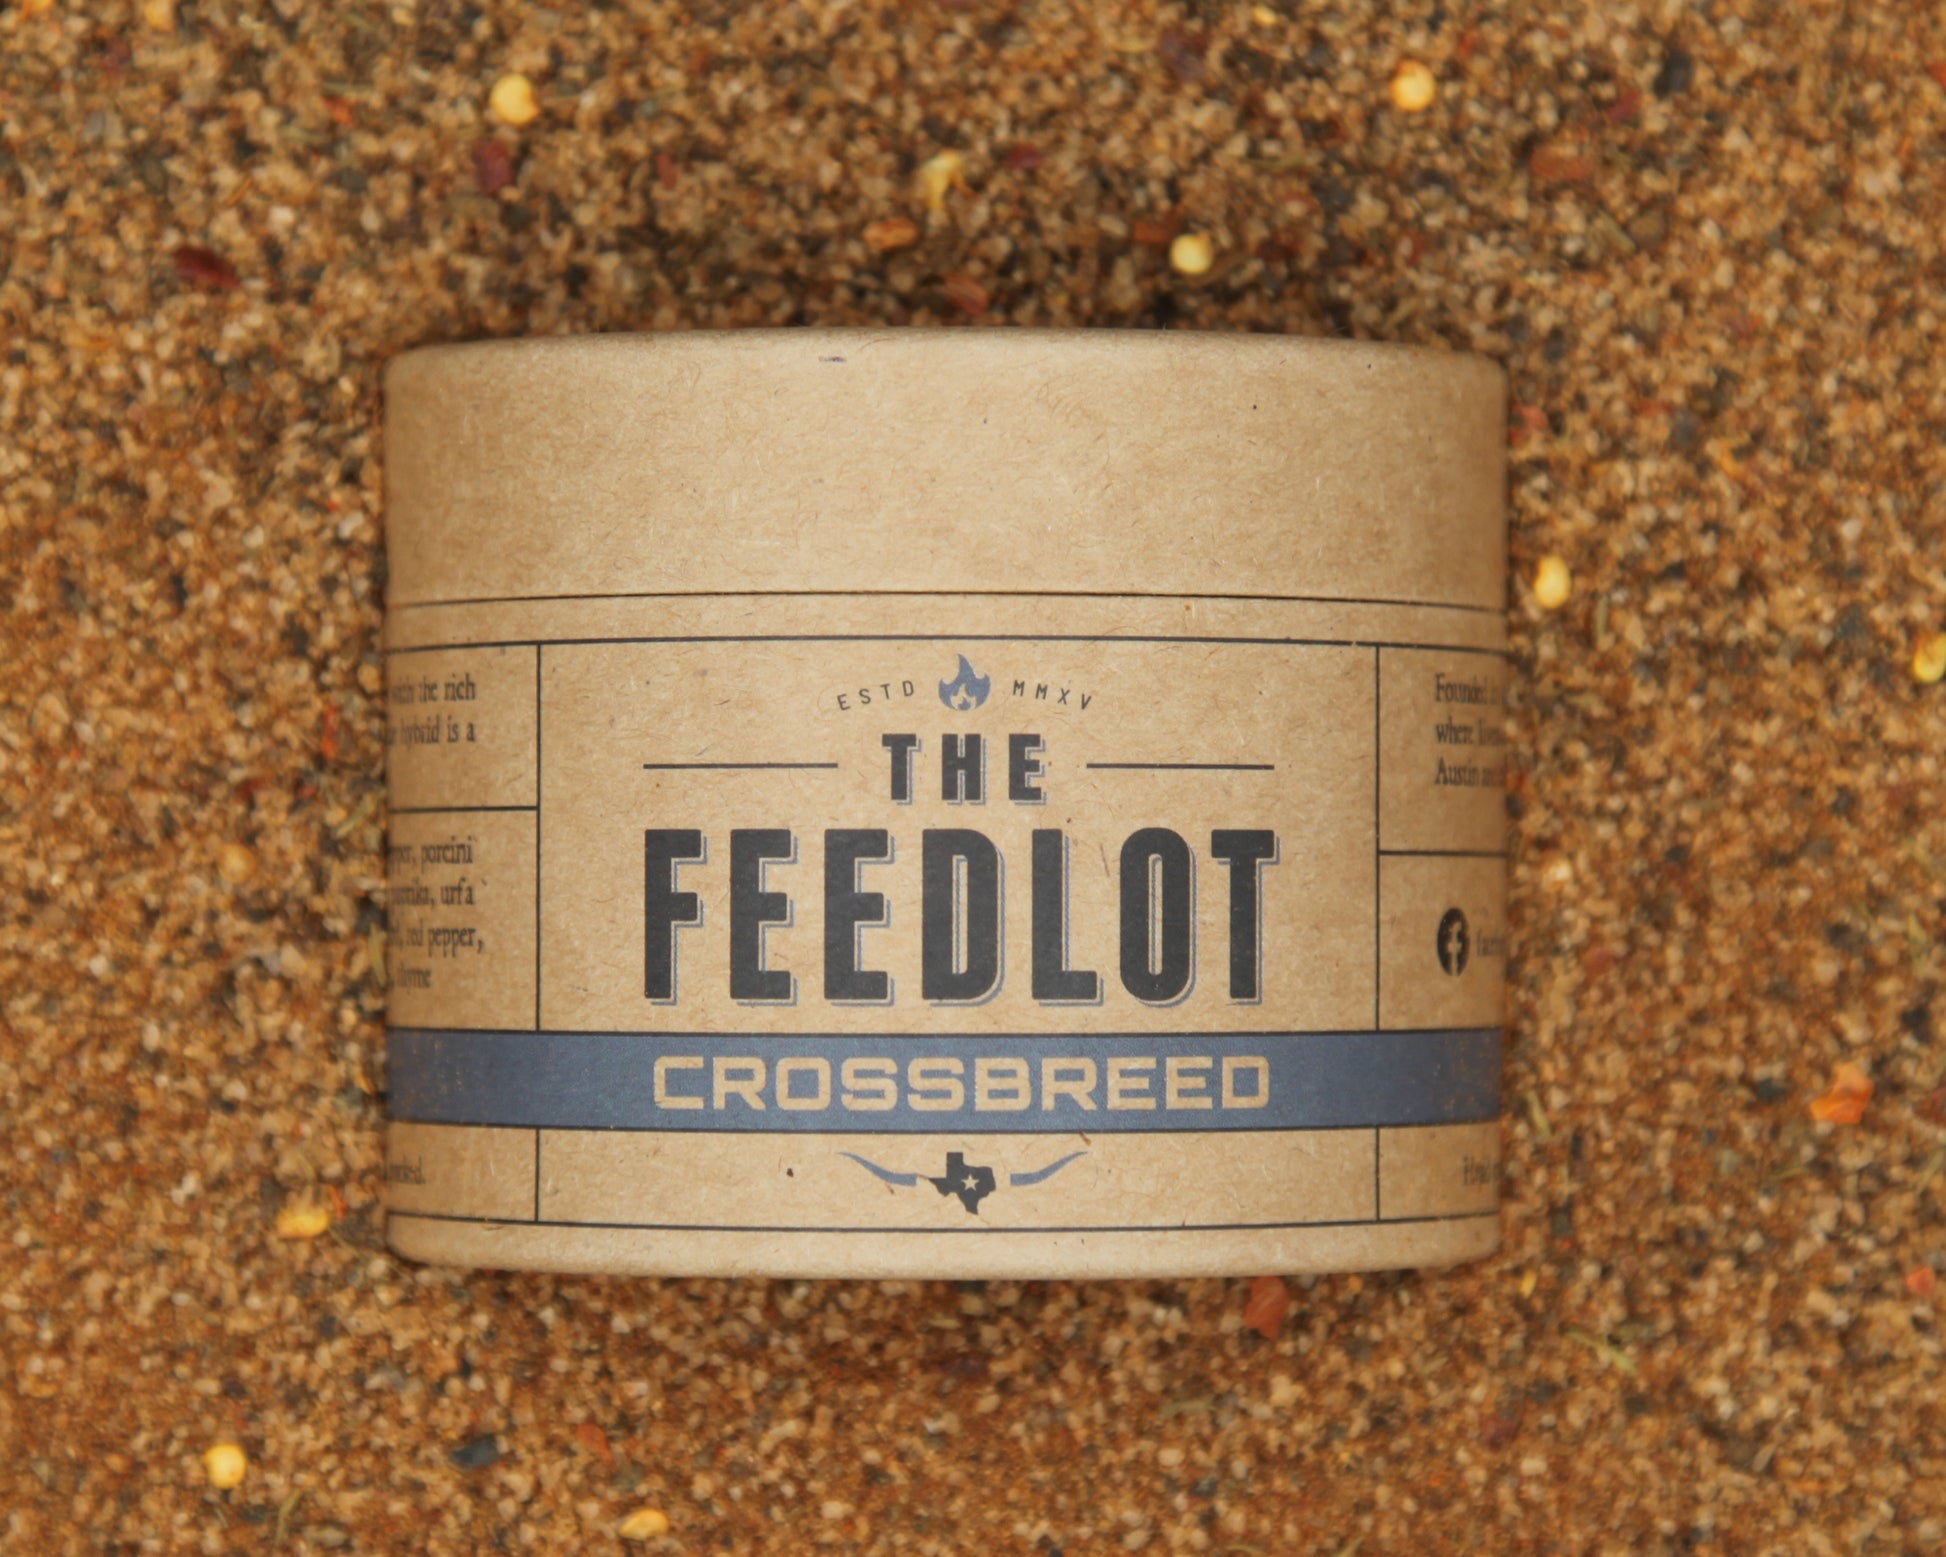 A round brown paper container labeled "Crossbreed" by The Feedlot sits on a textured sandy surface. The container features a simple, rustic design with a stripe and small icon, suggesting a natural product theme. This blend is perfect for your Black Angus cuts, enhancing the flavor like the ultimate rub.